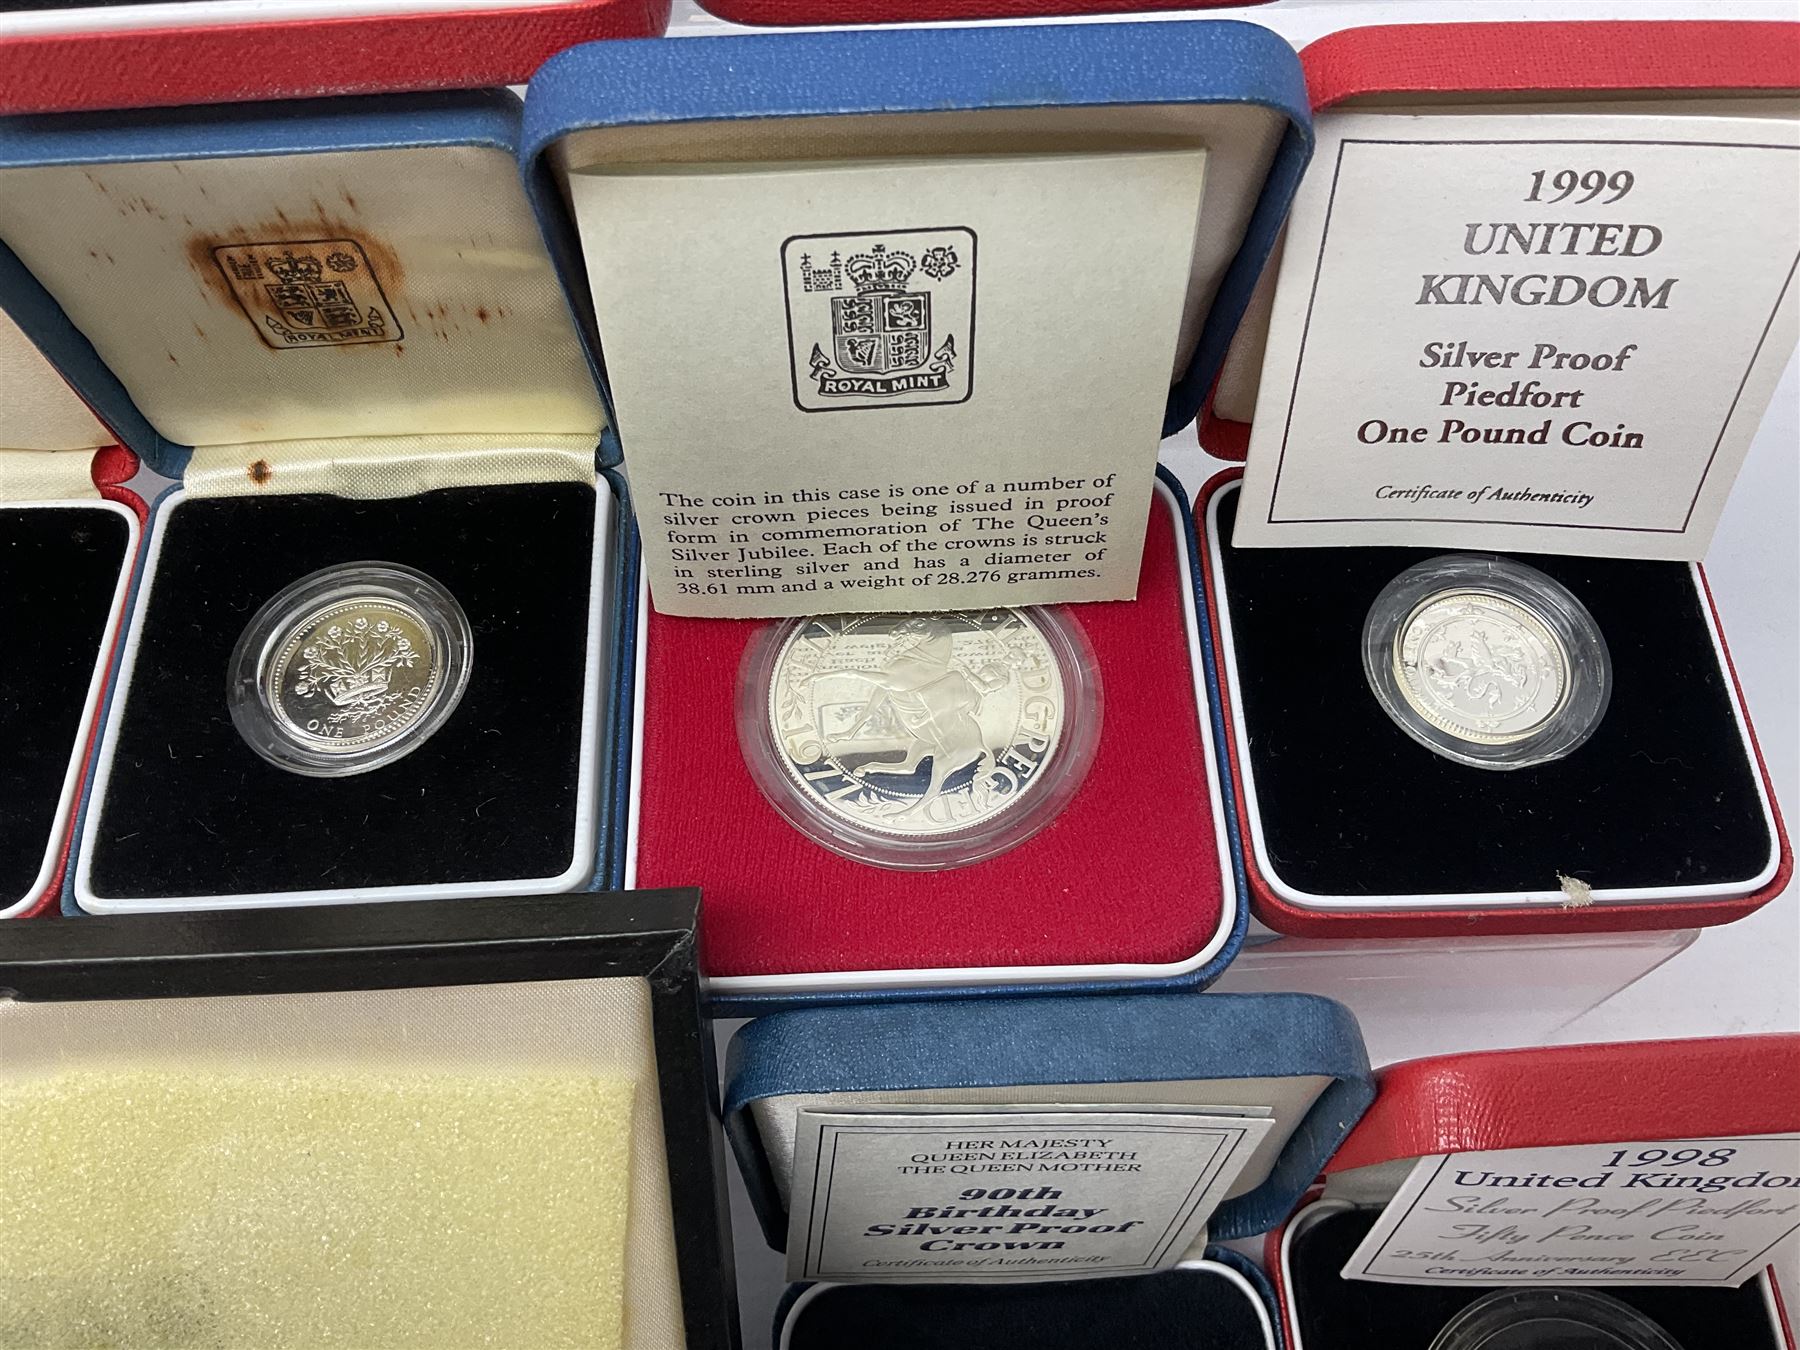 The Royal Mint United Kingdom silver proof coins - Image 5 of 7